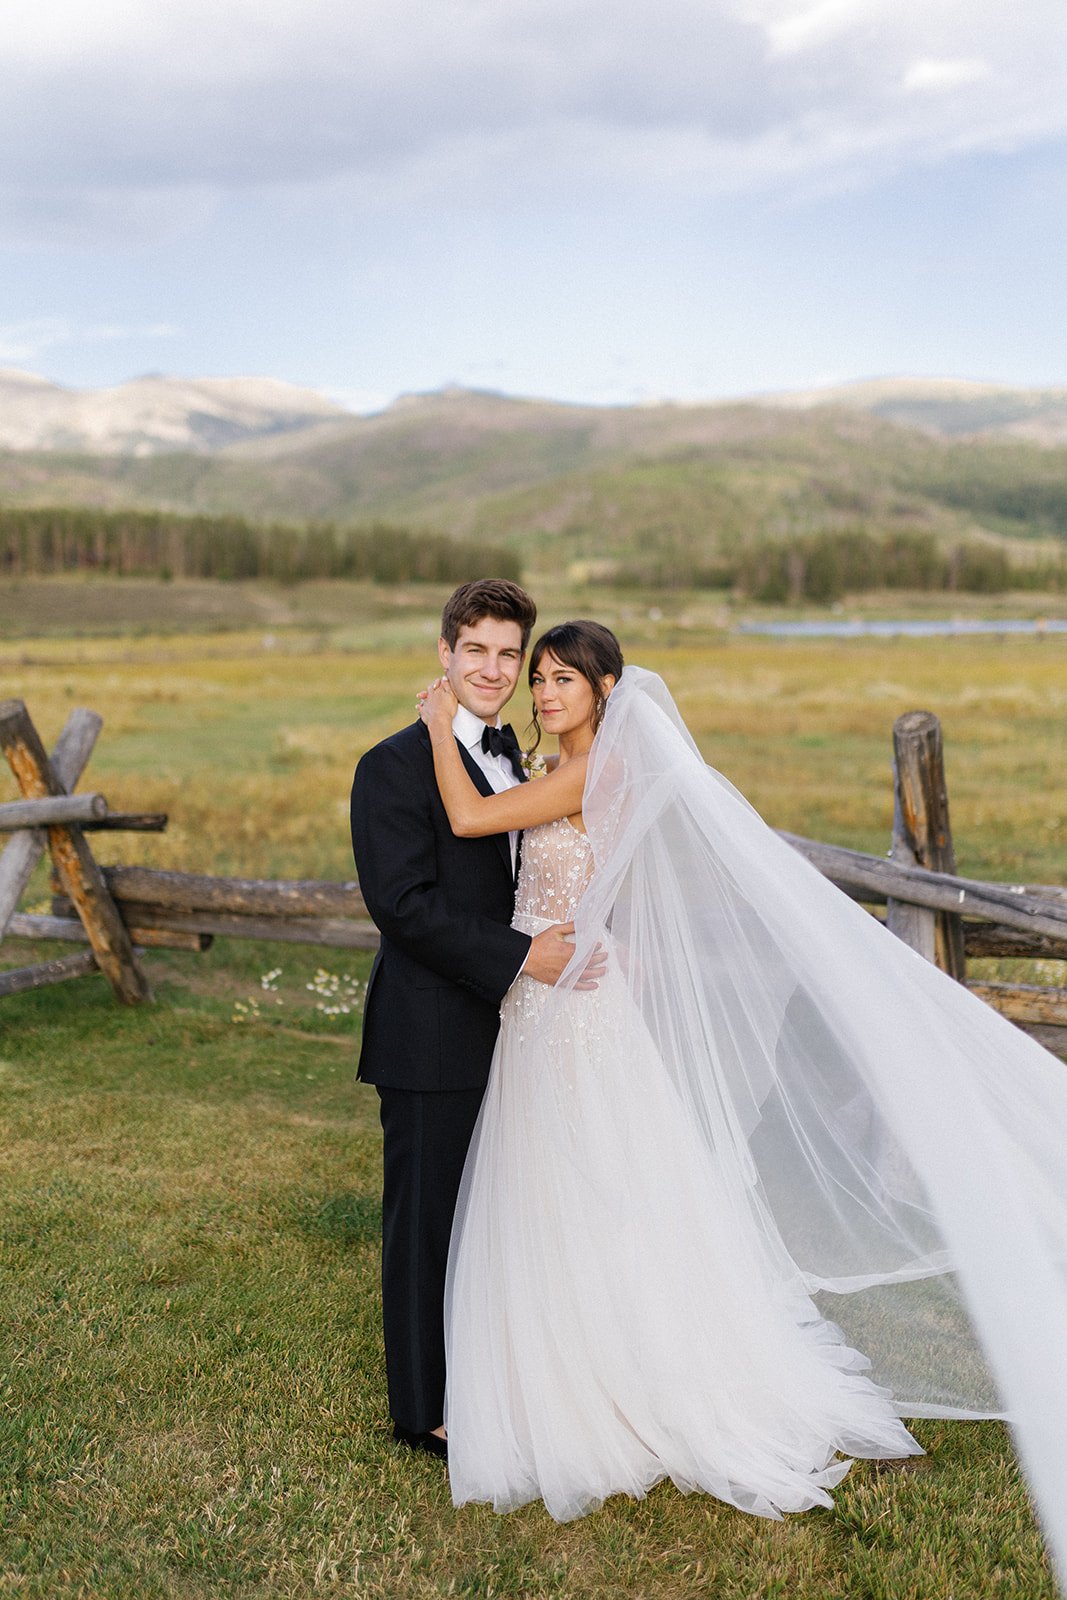  Liz Martinez Liz Martinez bridal Liz Martinez Indigo tulle aline wedding gown beaded wedding gown Devils thumb ranch Colorado weddings  